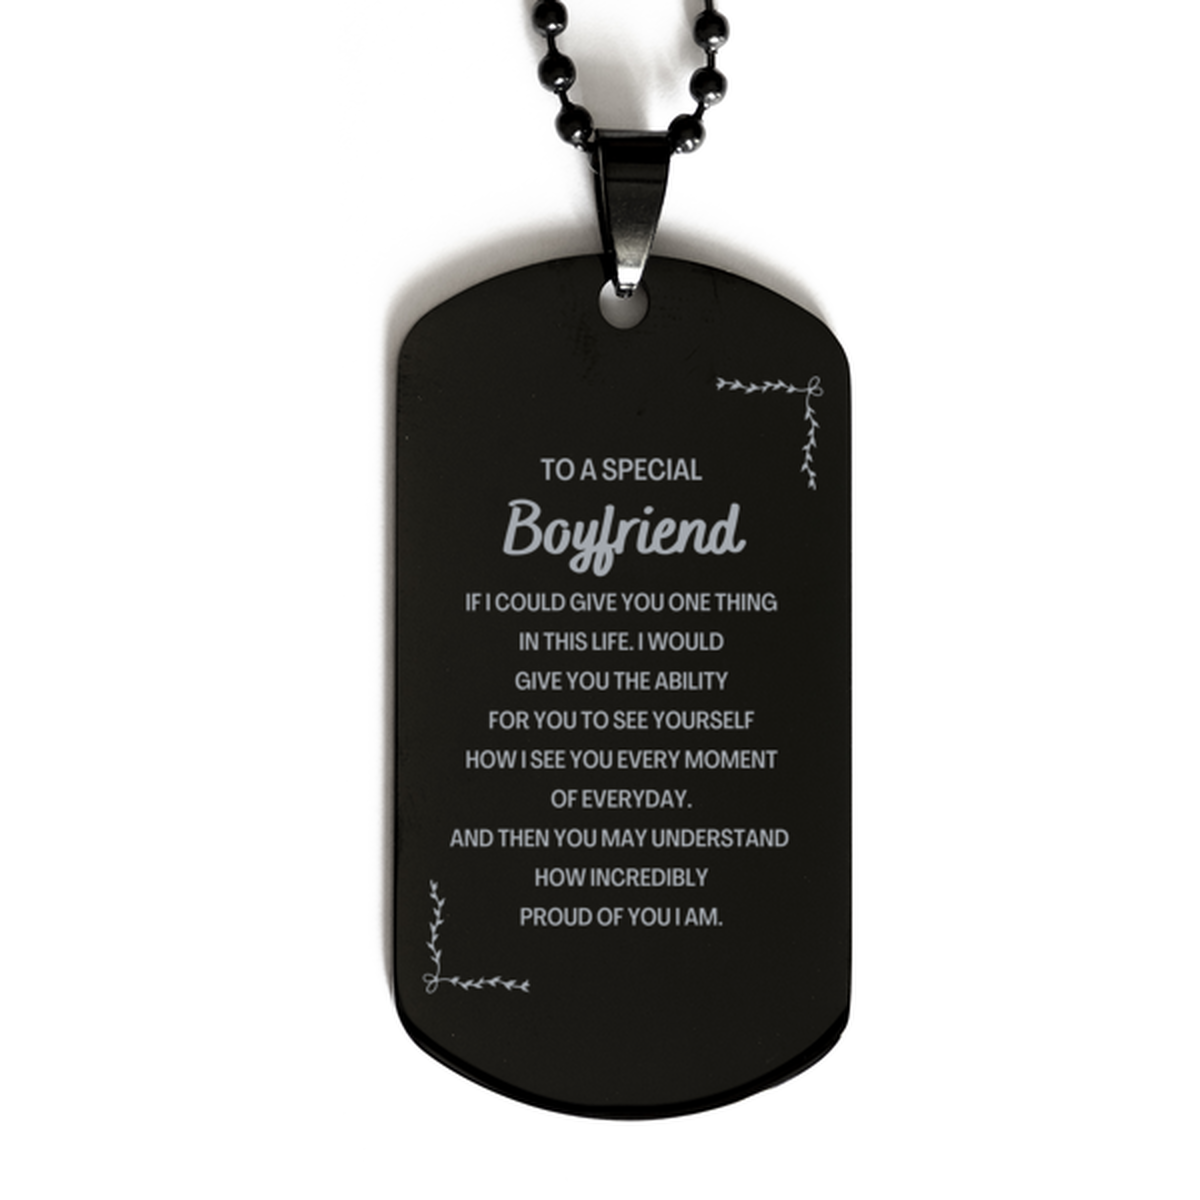 To My Boyfriend Black Dog Tag, Gifts For Boyfriend Engraved, Inspirational Gifts for Christmas Birthday, Epic Gifts for Boyfriend To A Special Boyfriend how incredibly proud of you I am